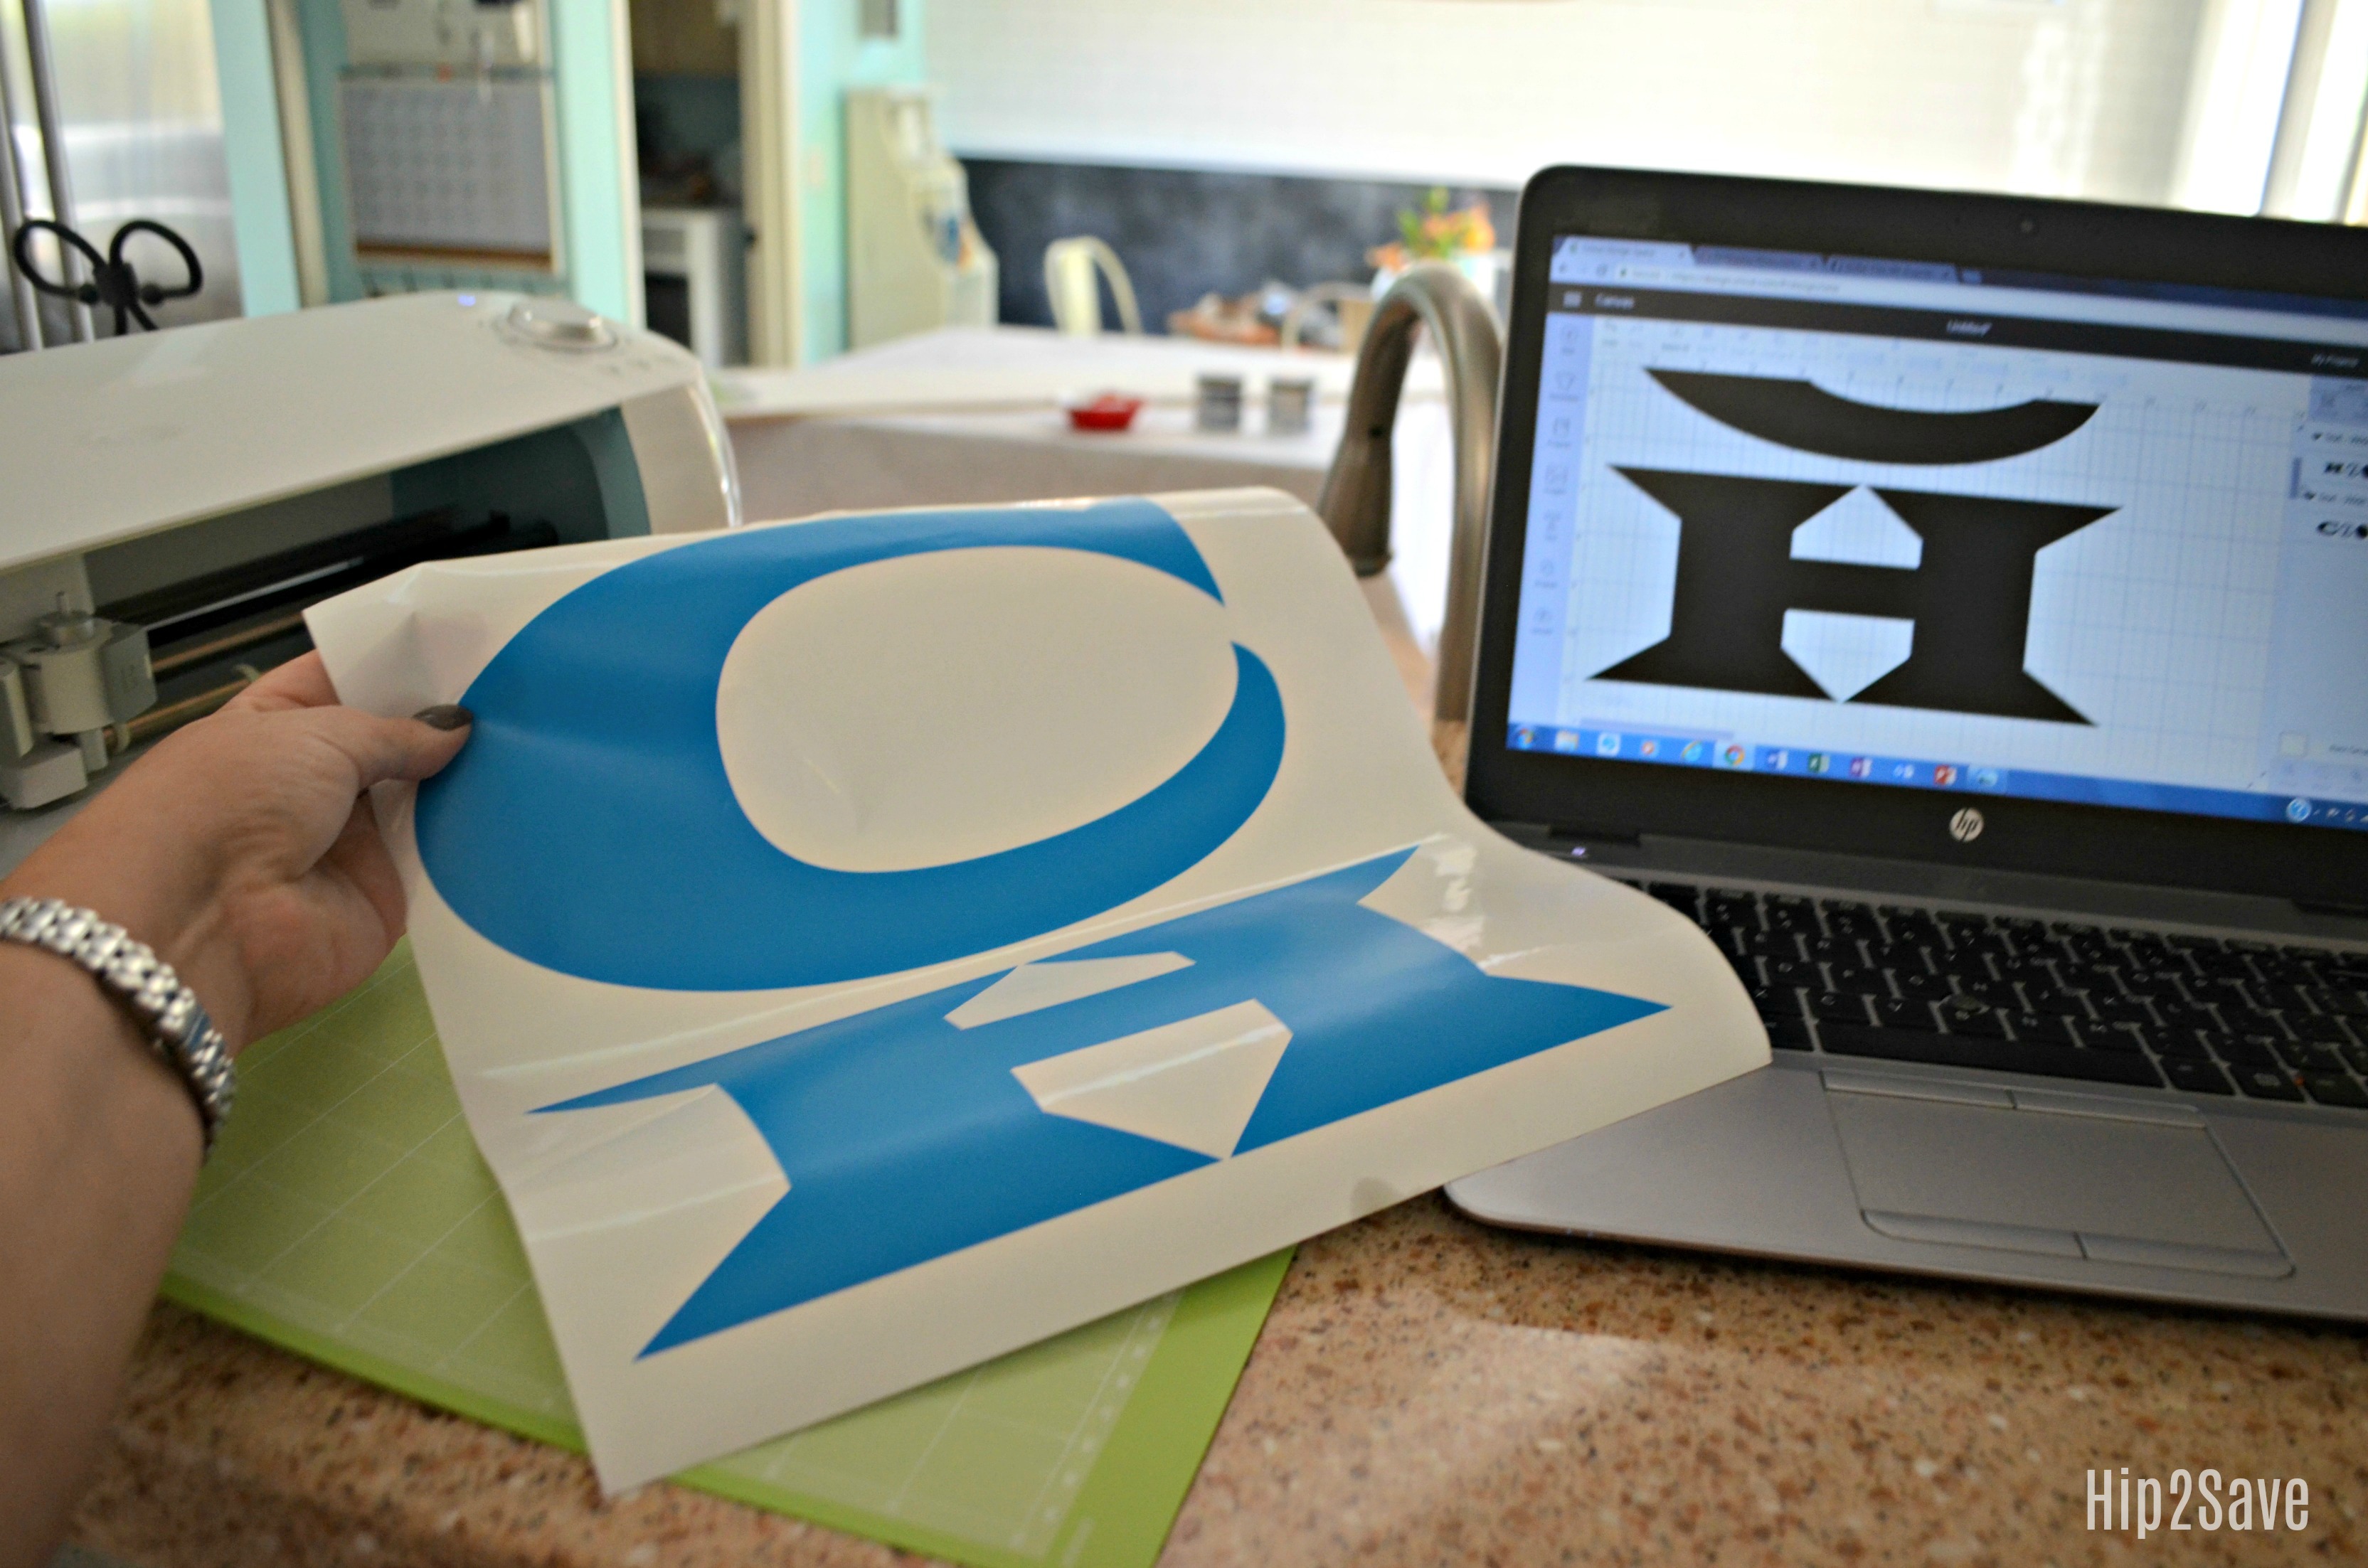 Cricut and Silhouette use different types of software. 